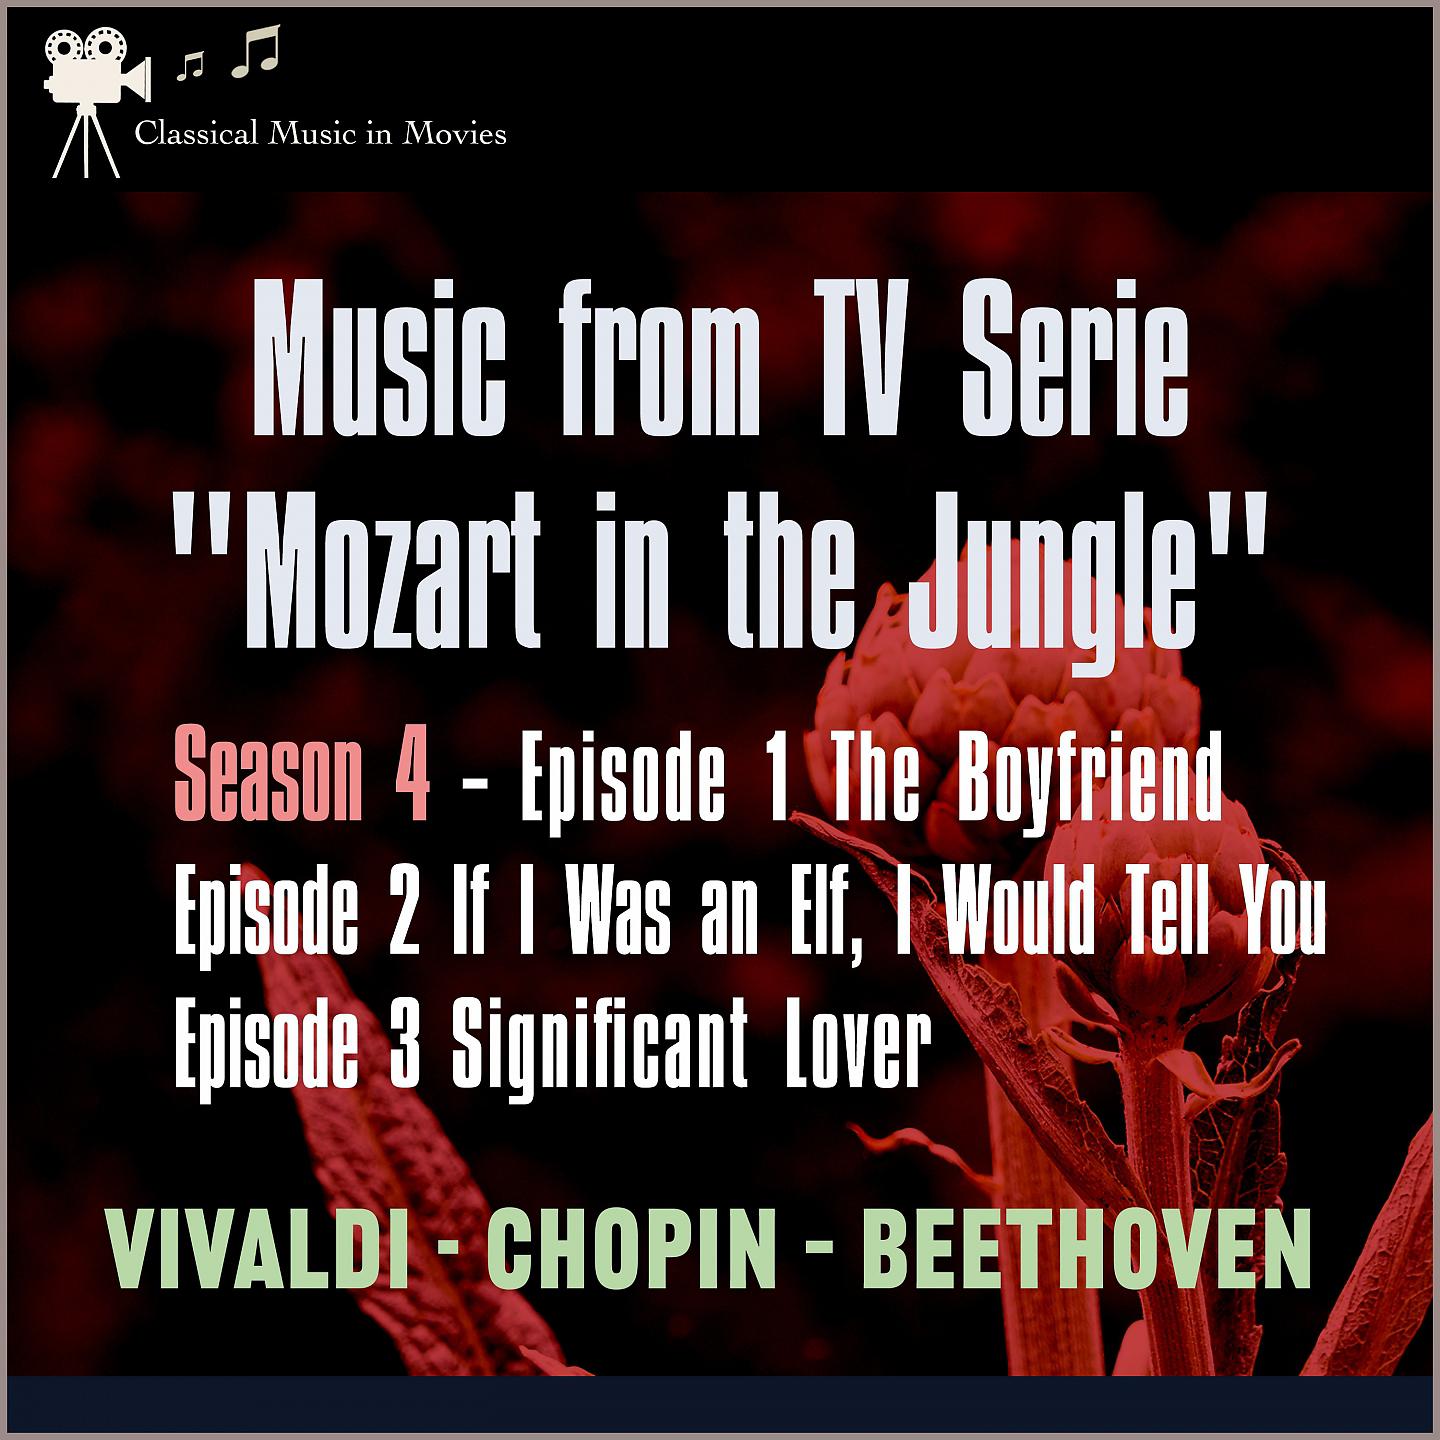 Постер альбома Music from Tv Serie: "Mozart in the Jungel" S4 E1 the Boyfriend - S4 E2 If I Was an Elf, I Would Tell You - S4 E3 Significant Lover